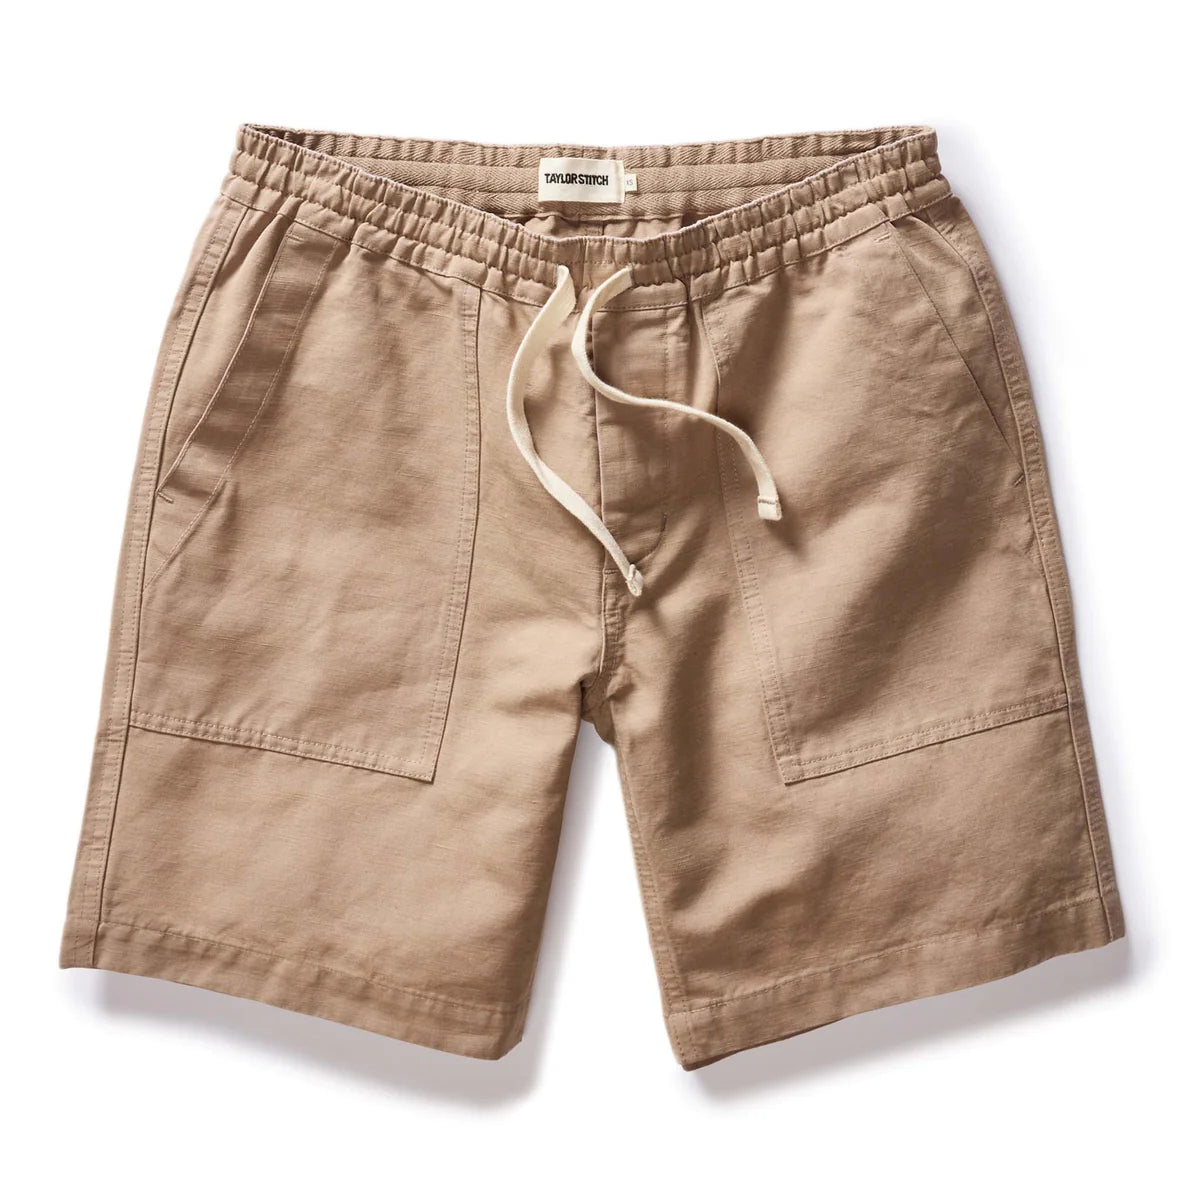 Taylor Stitch - Apres Short in Dried Earth